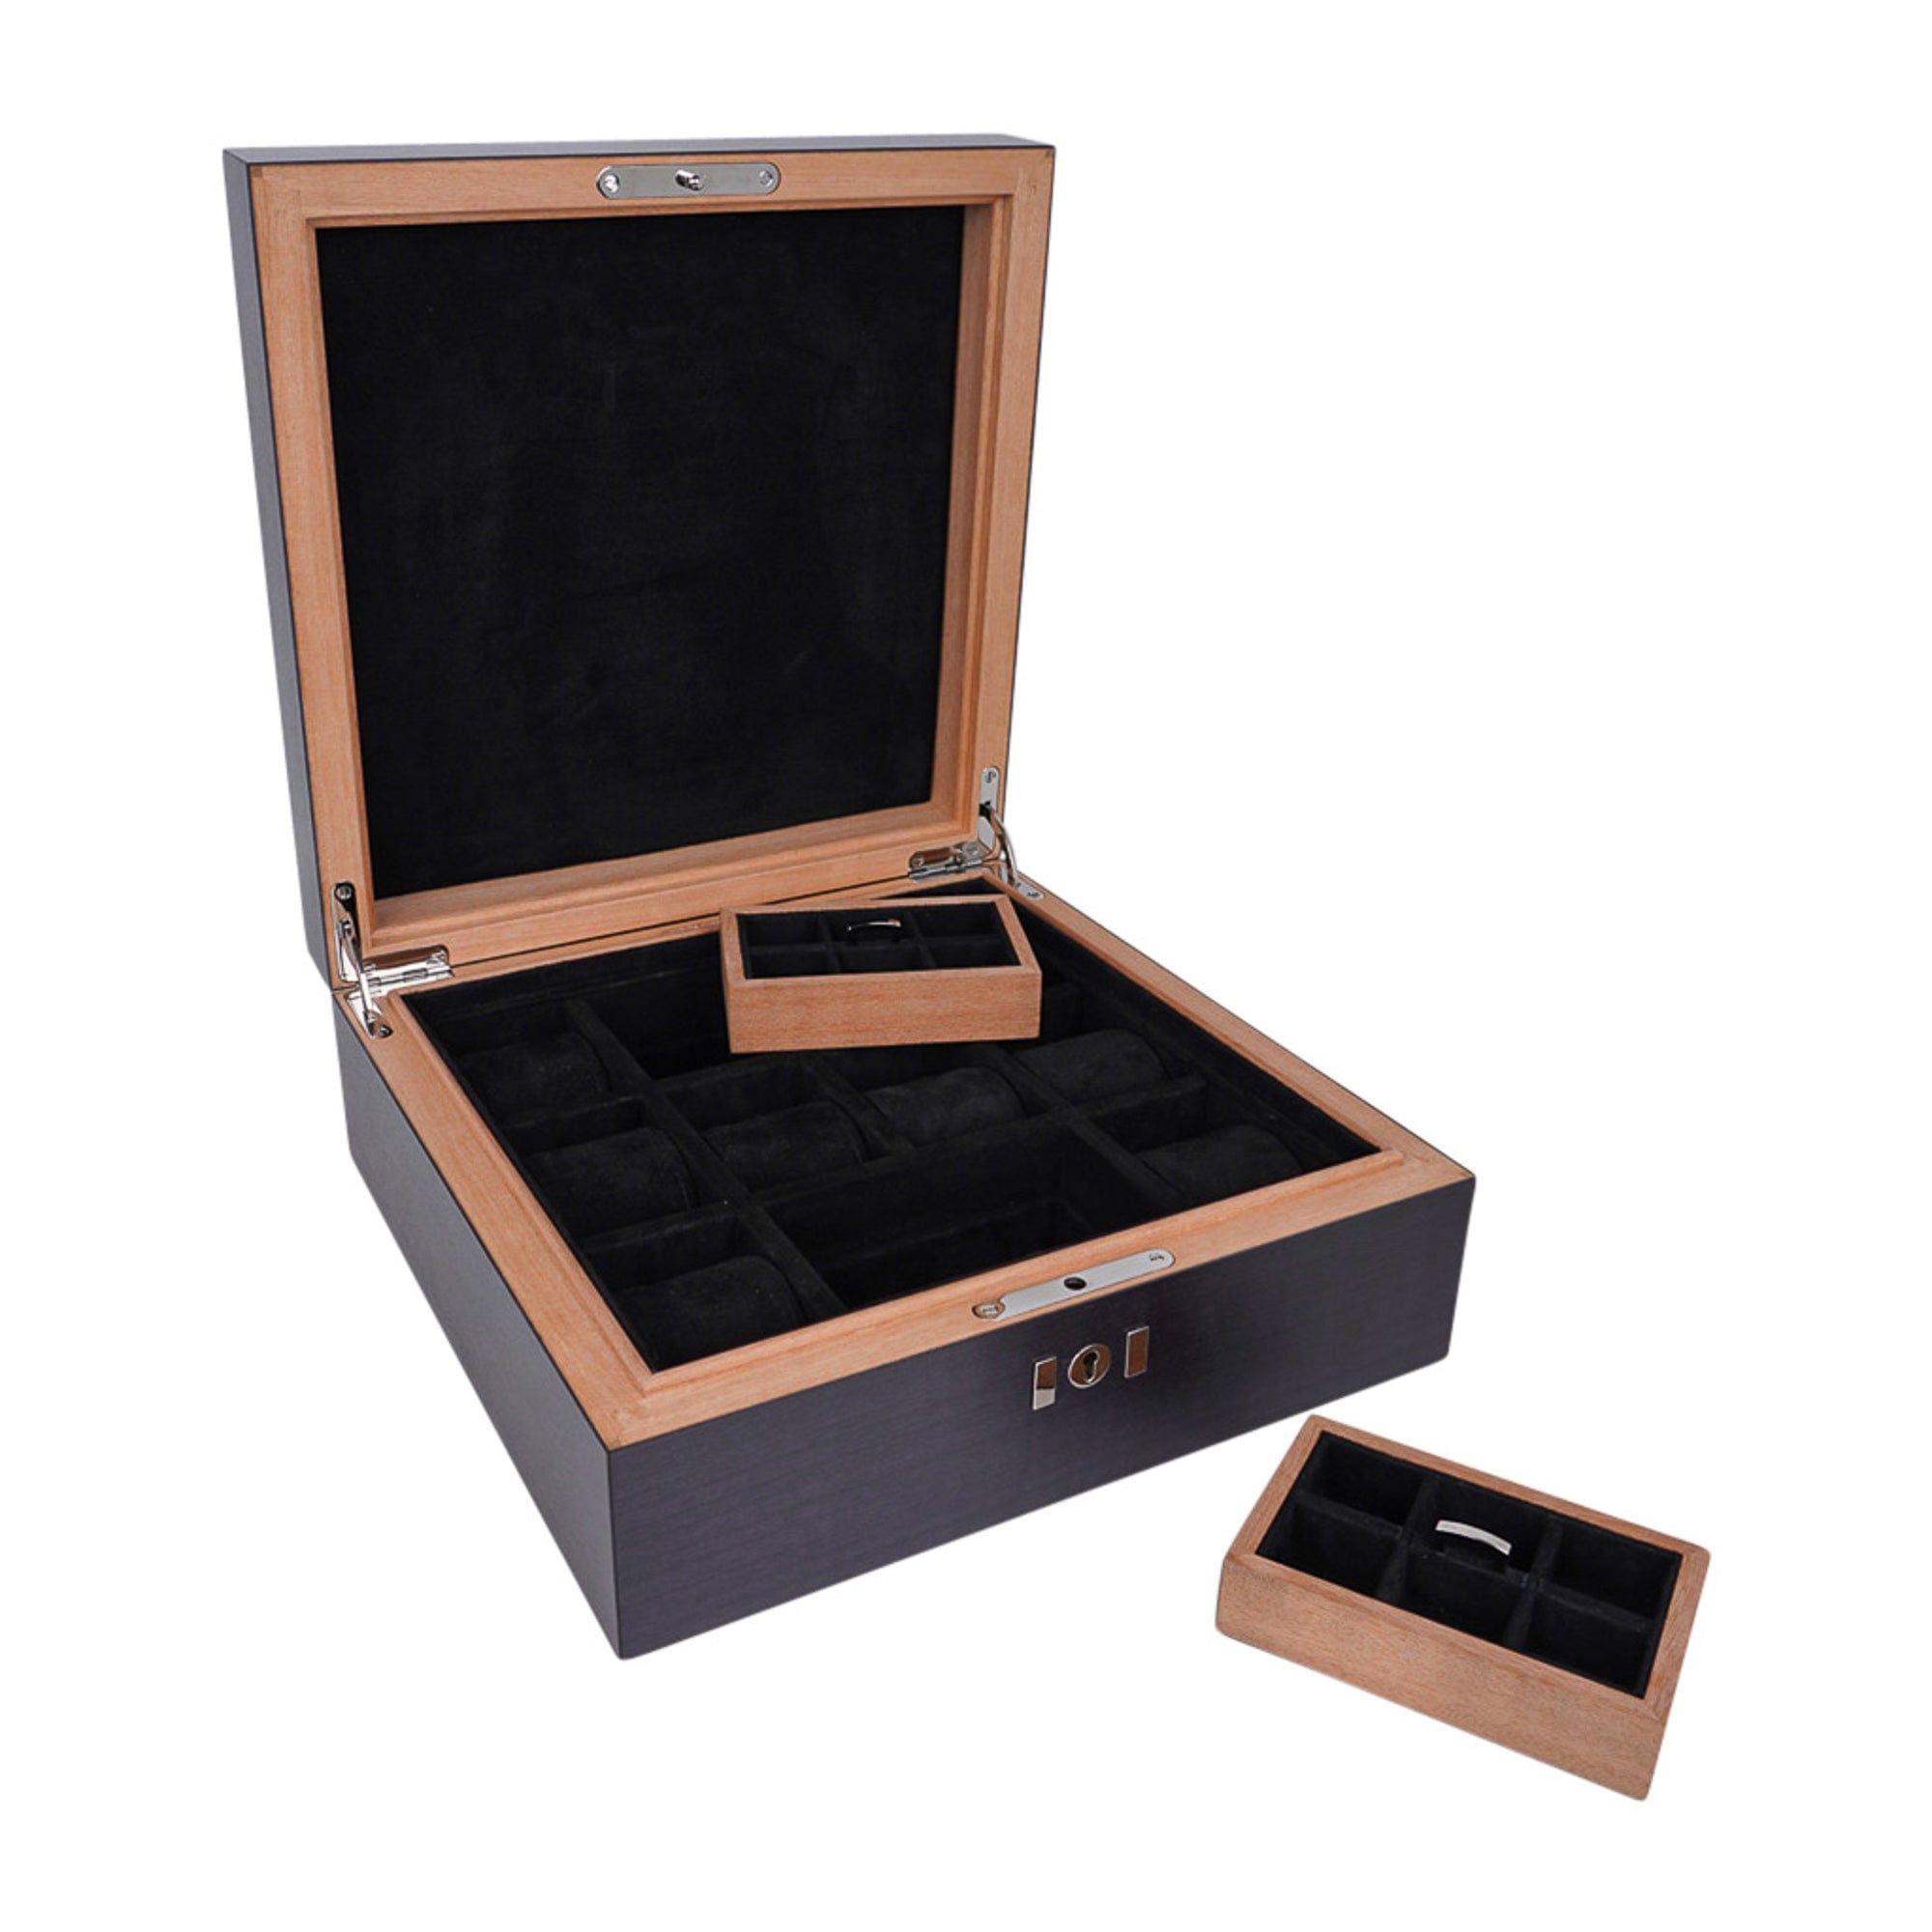 Hermes B09 Luxurious Large Mahogany Wood Box for 2 Watches New